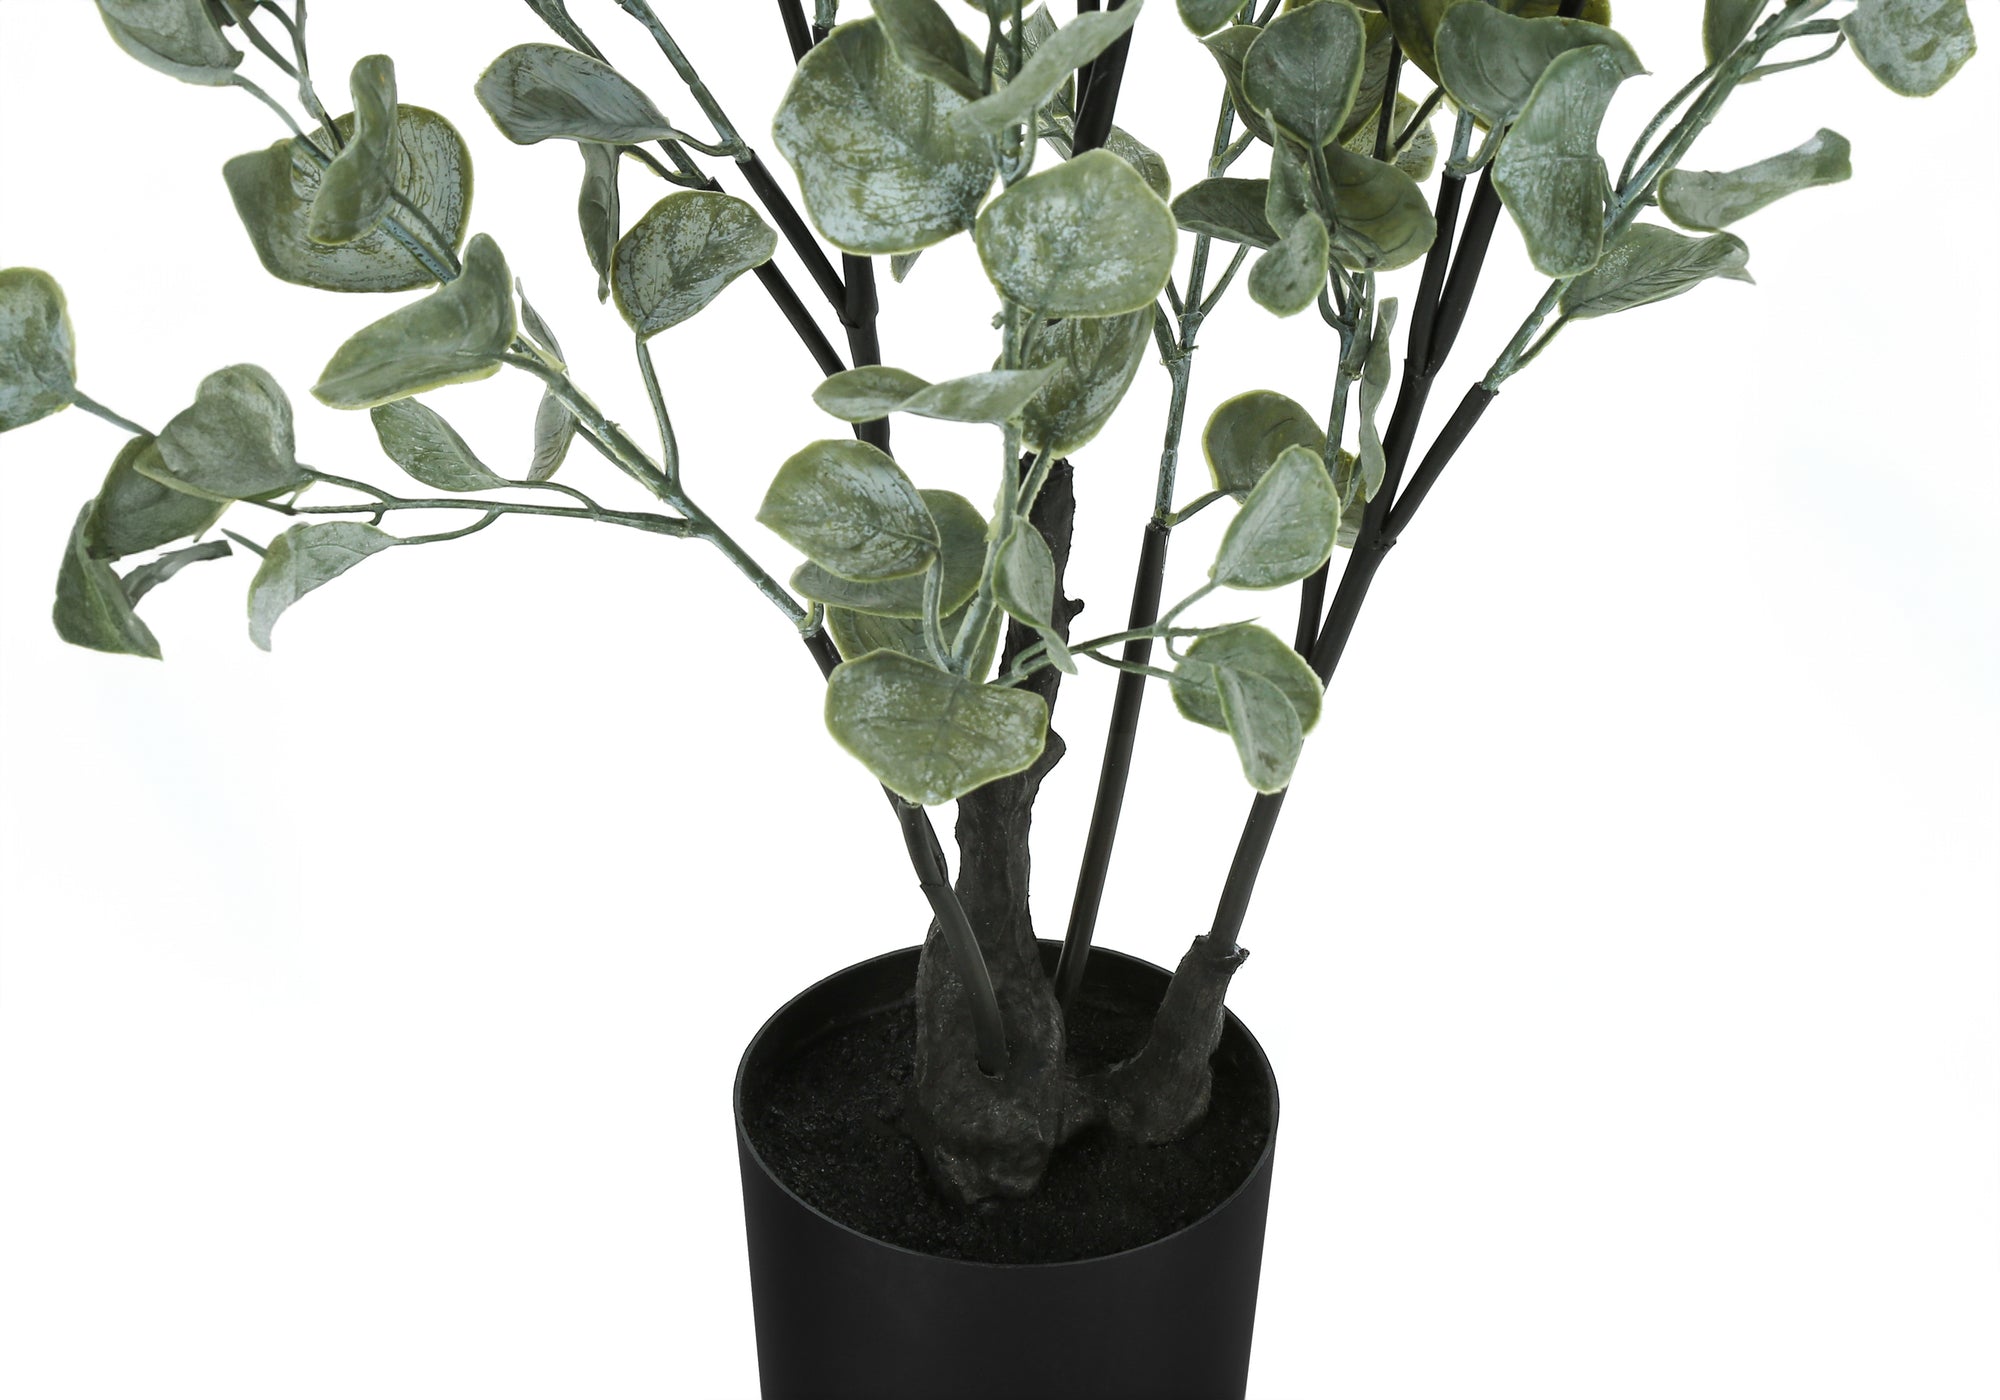 MN-559562    Artificial Plant, 35" Tall, Eucalyptus Tree, Indoor, Faux, Fake, Floor, Greenery, Potted, Decorative, Green Leaves, Black Pot